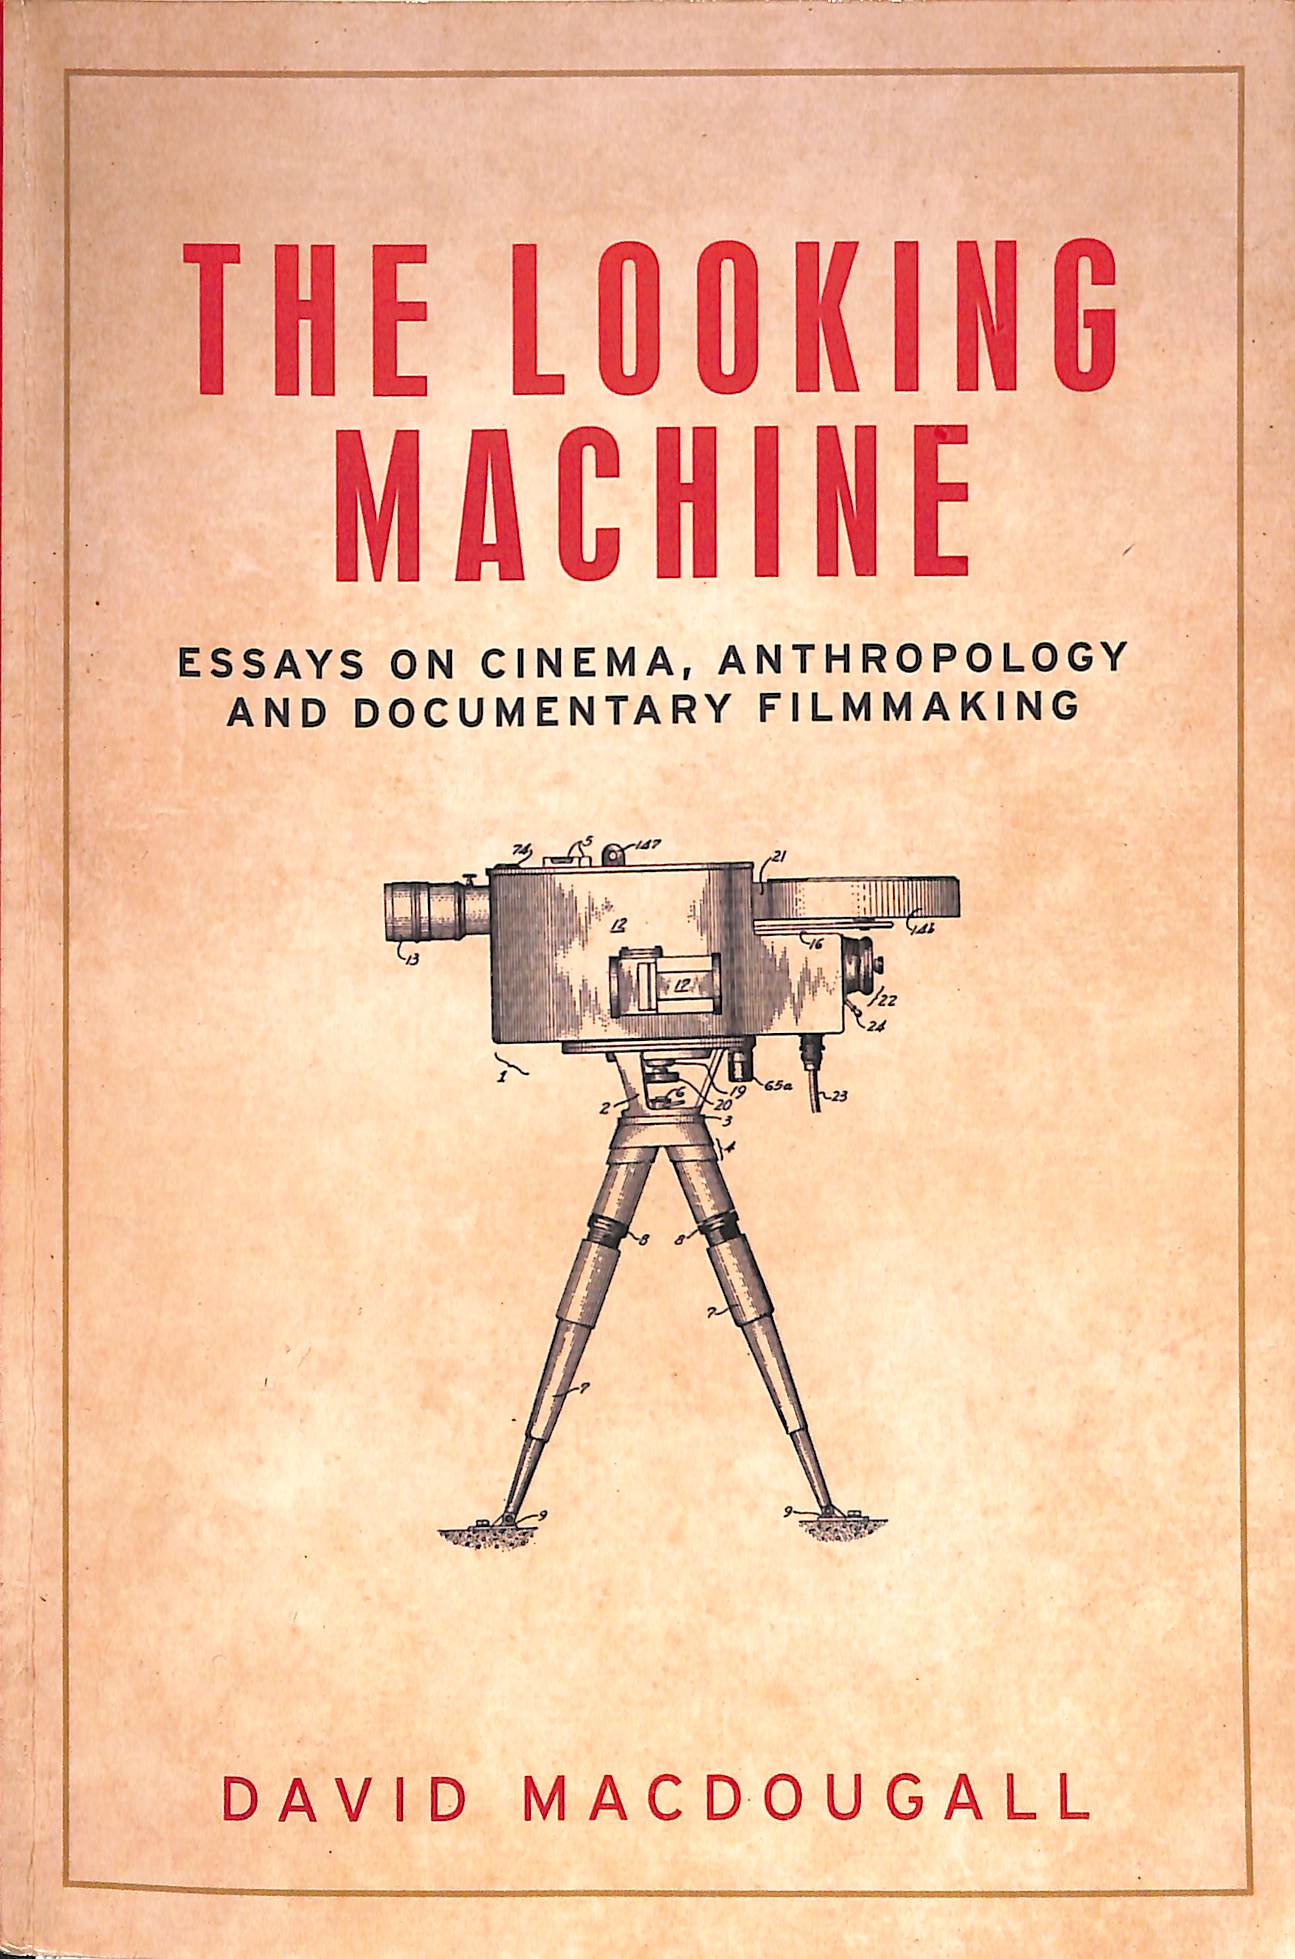 The looking machine essays on cinema, anthropology and documentary filmmaking